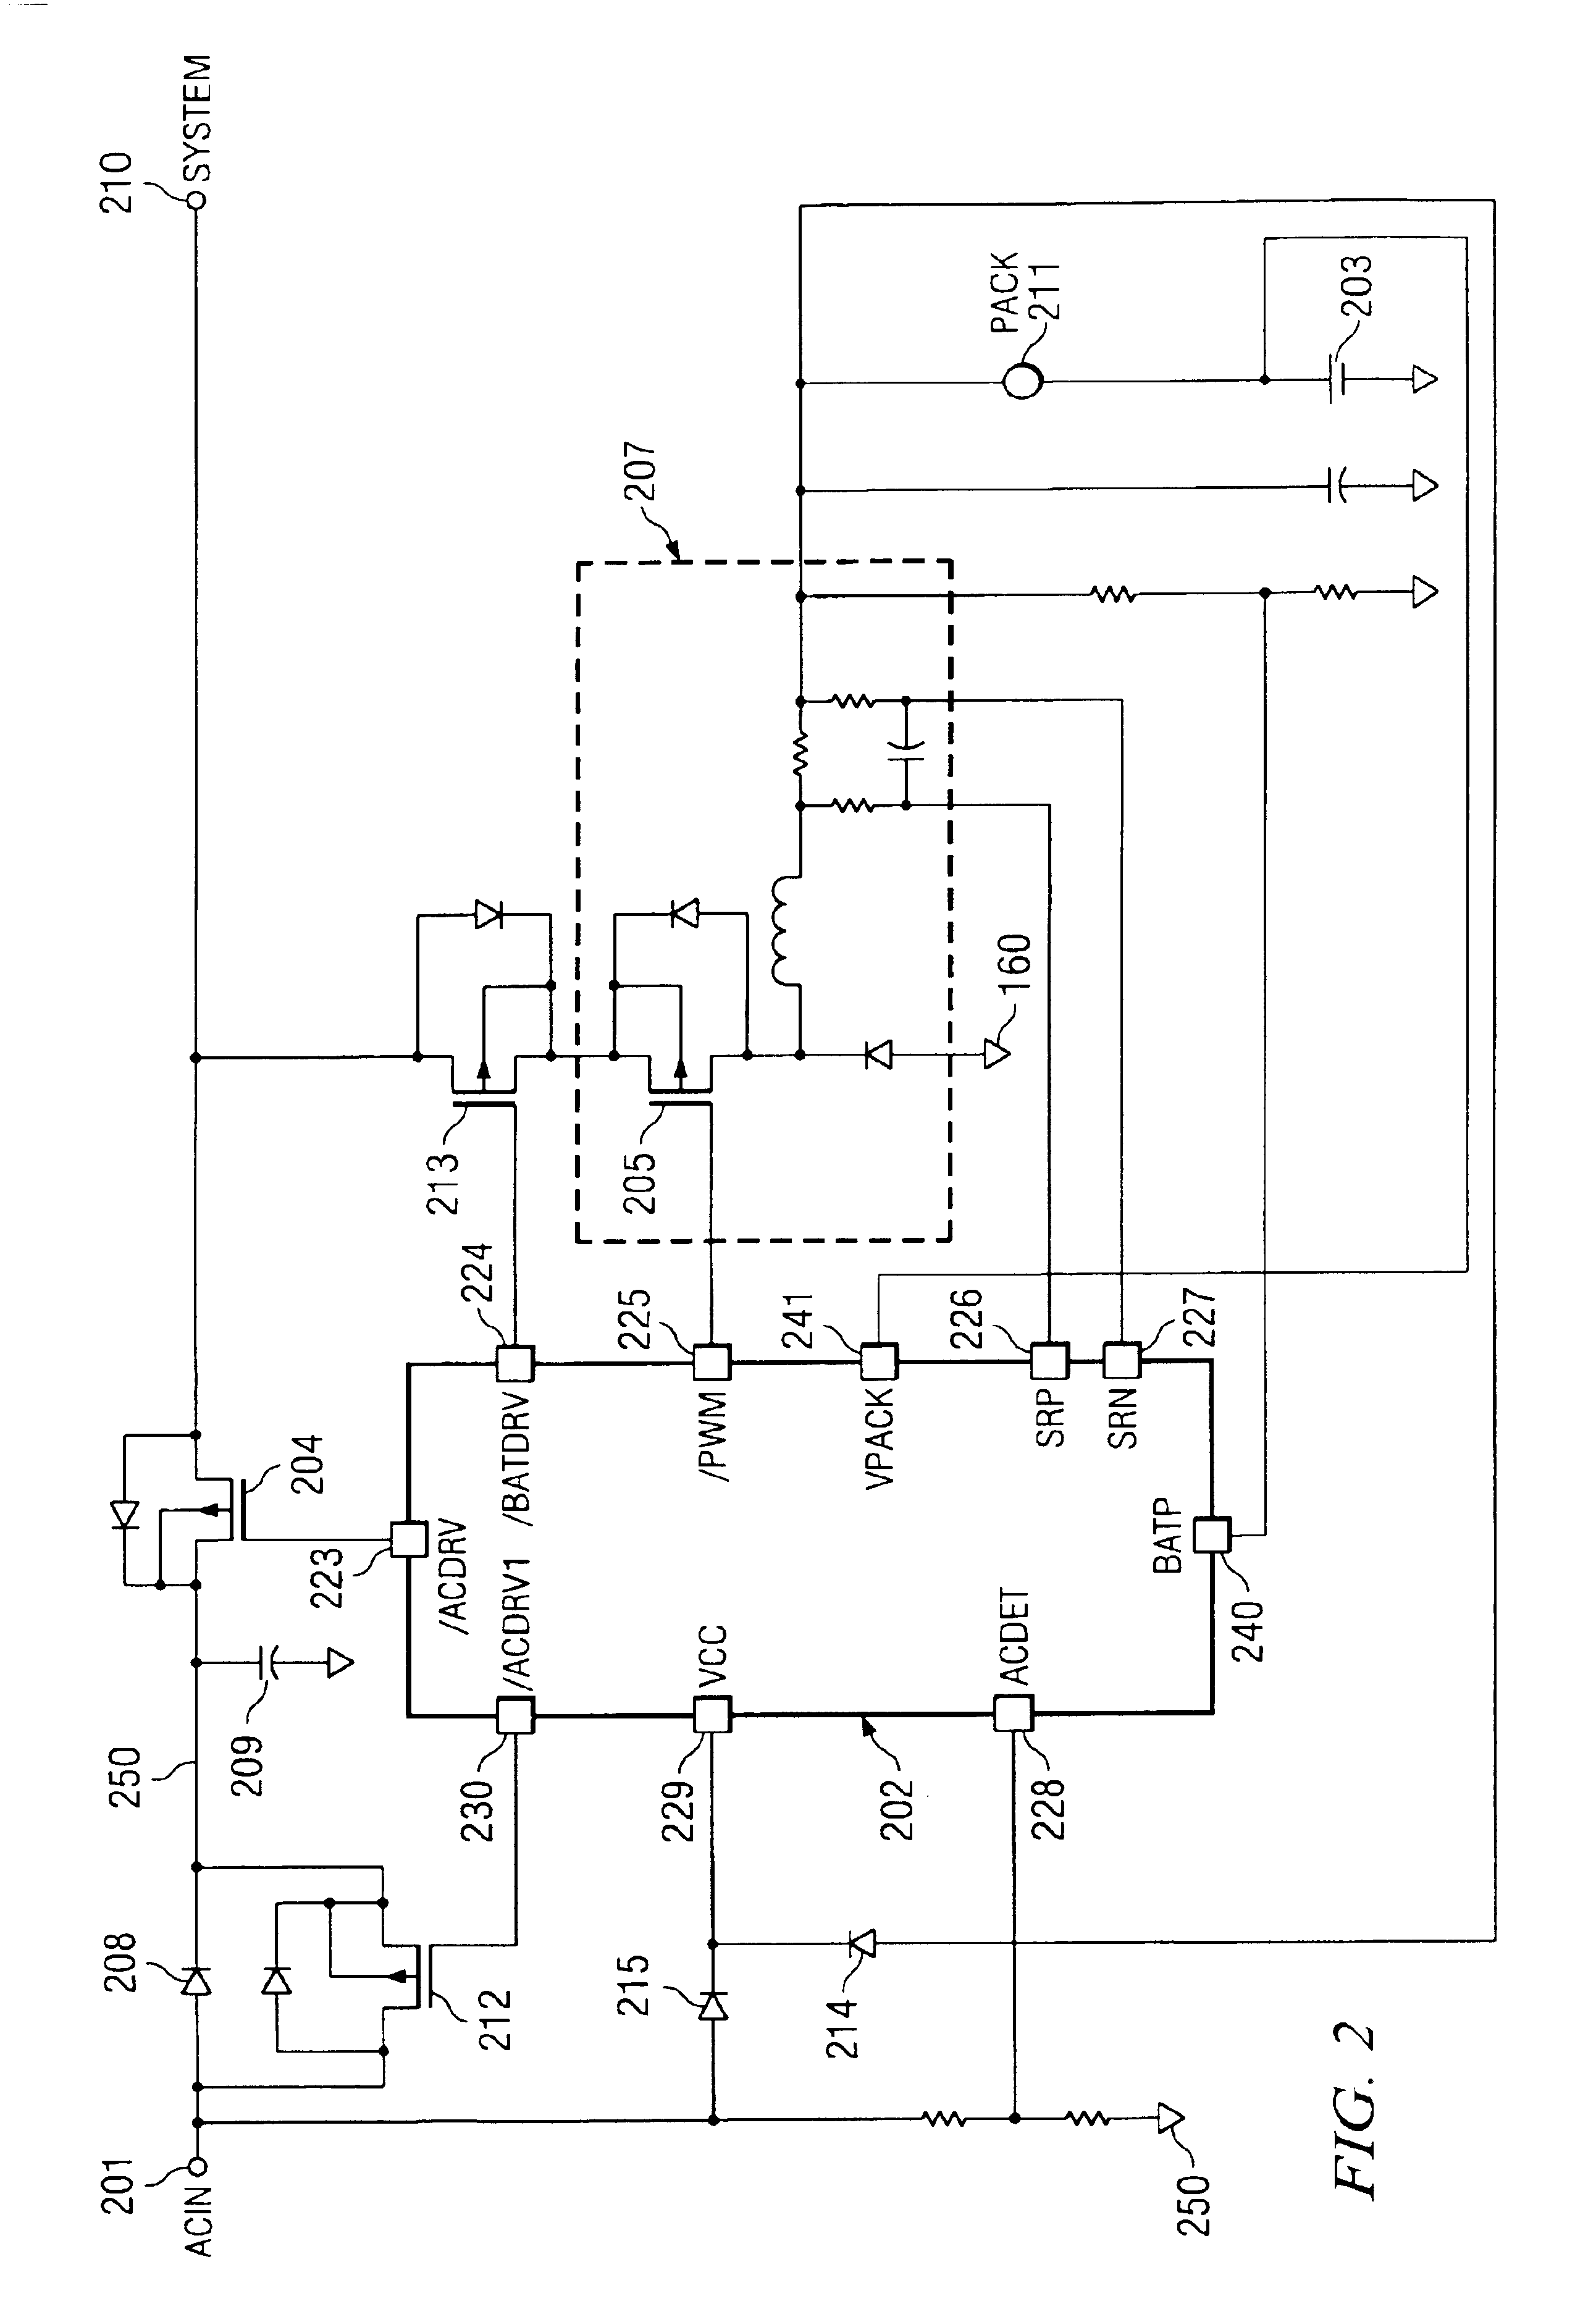 Architecture for switching between an external and internal power source